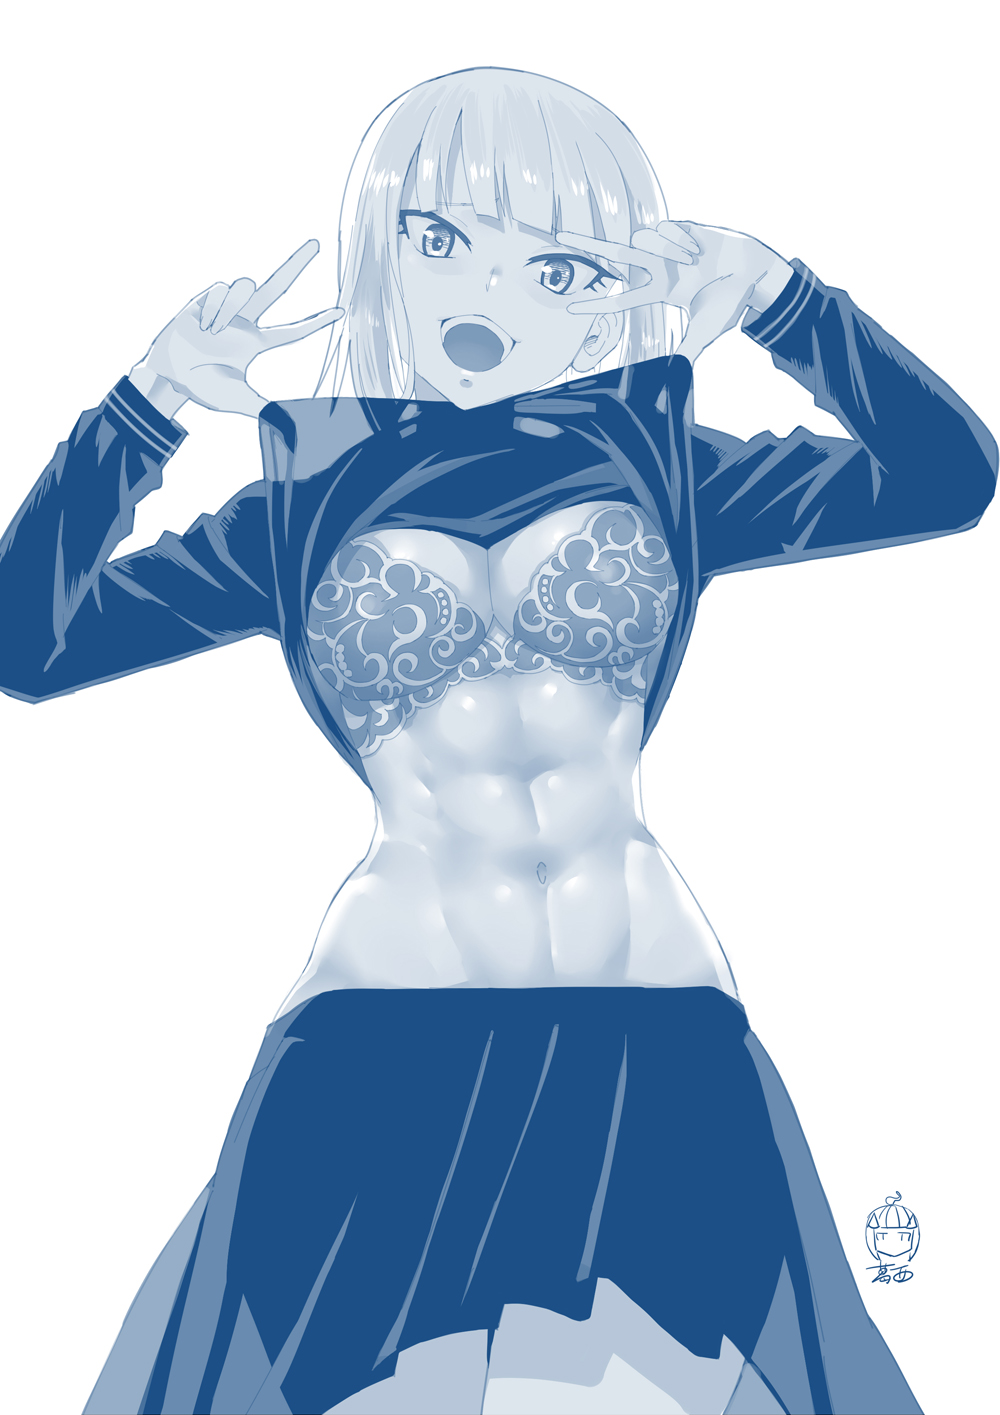 Anime 1000x1415 Dumbbell Nan Kilo Moteru? muscles abs 6-pack JK silver hair belly thighs lifting shirt monochrome muscular open mouth belly button anime girls ecchi peace sign short hair blunt bangs curvy 2D looking at viewer Gina Boyd simple background anime fan art underboob portrait display black sweater black skirts shiny hair the gap low-angle frontal view bra Ge Xi